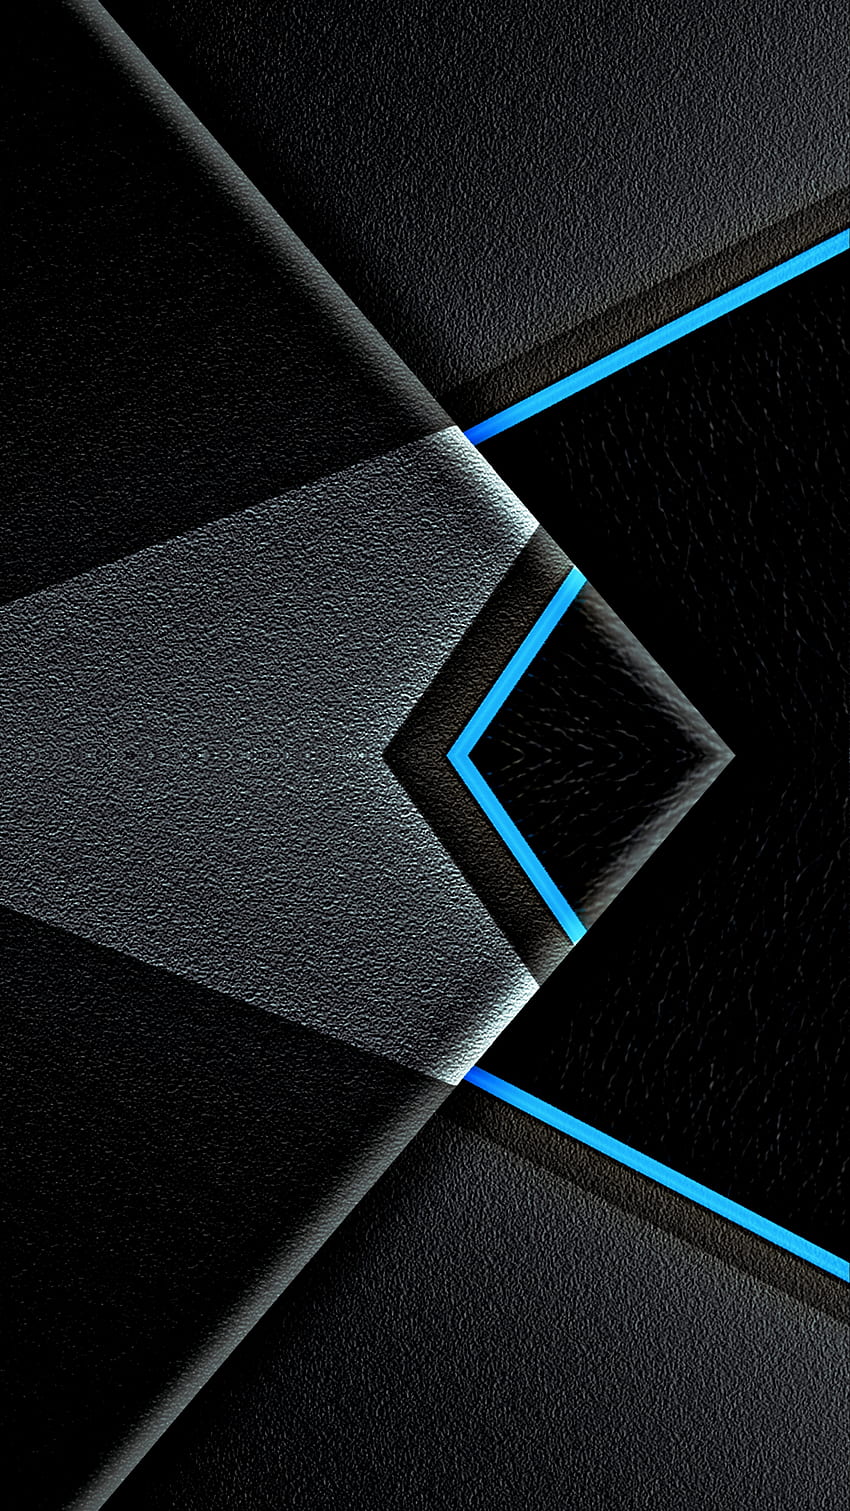 lhjhf, digital, new, neon, texture, android, black, pattern, abstract, iphone, 3d, amoled, samsung, gray, blue, material property, modern, shapes, , design, geometric, lg, galaxy HD phone wallpaper